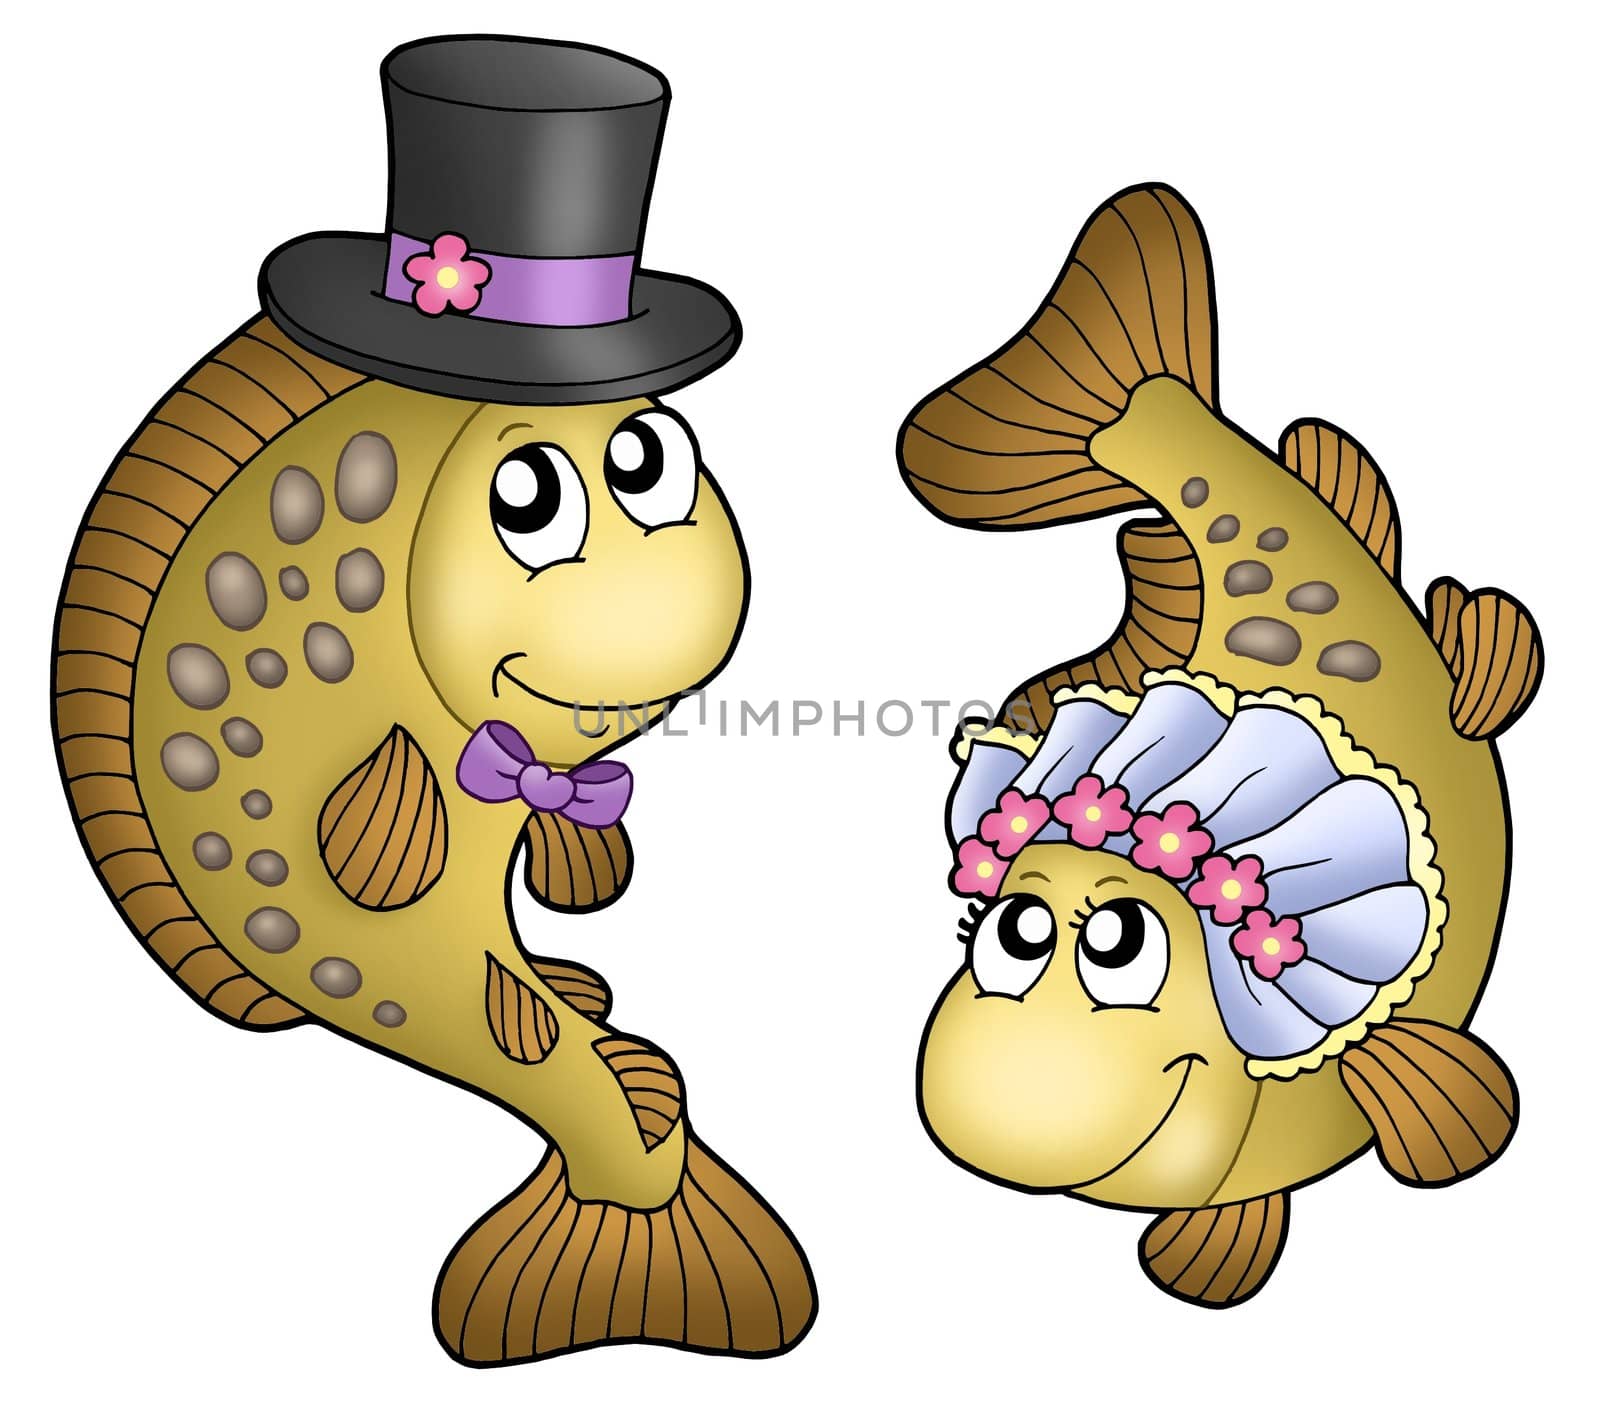 Wedding with cute carps - color illustration.